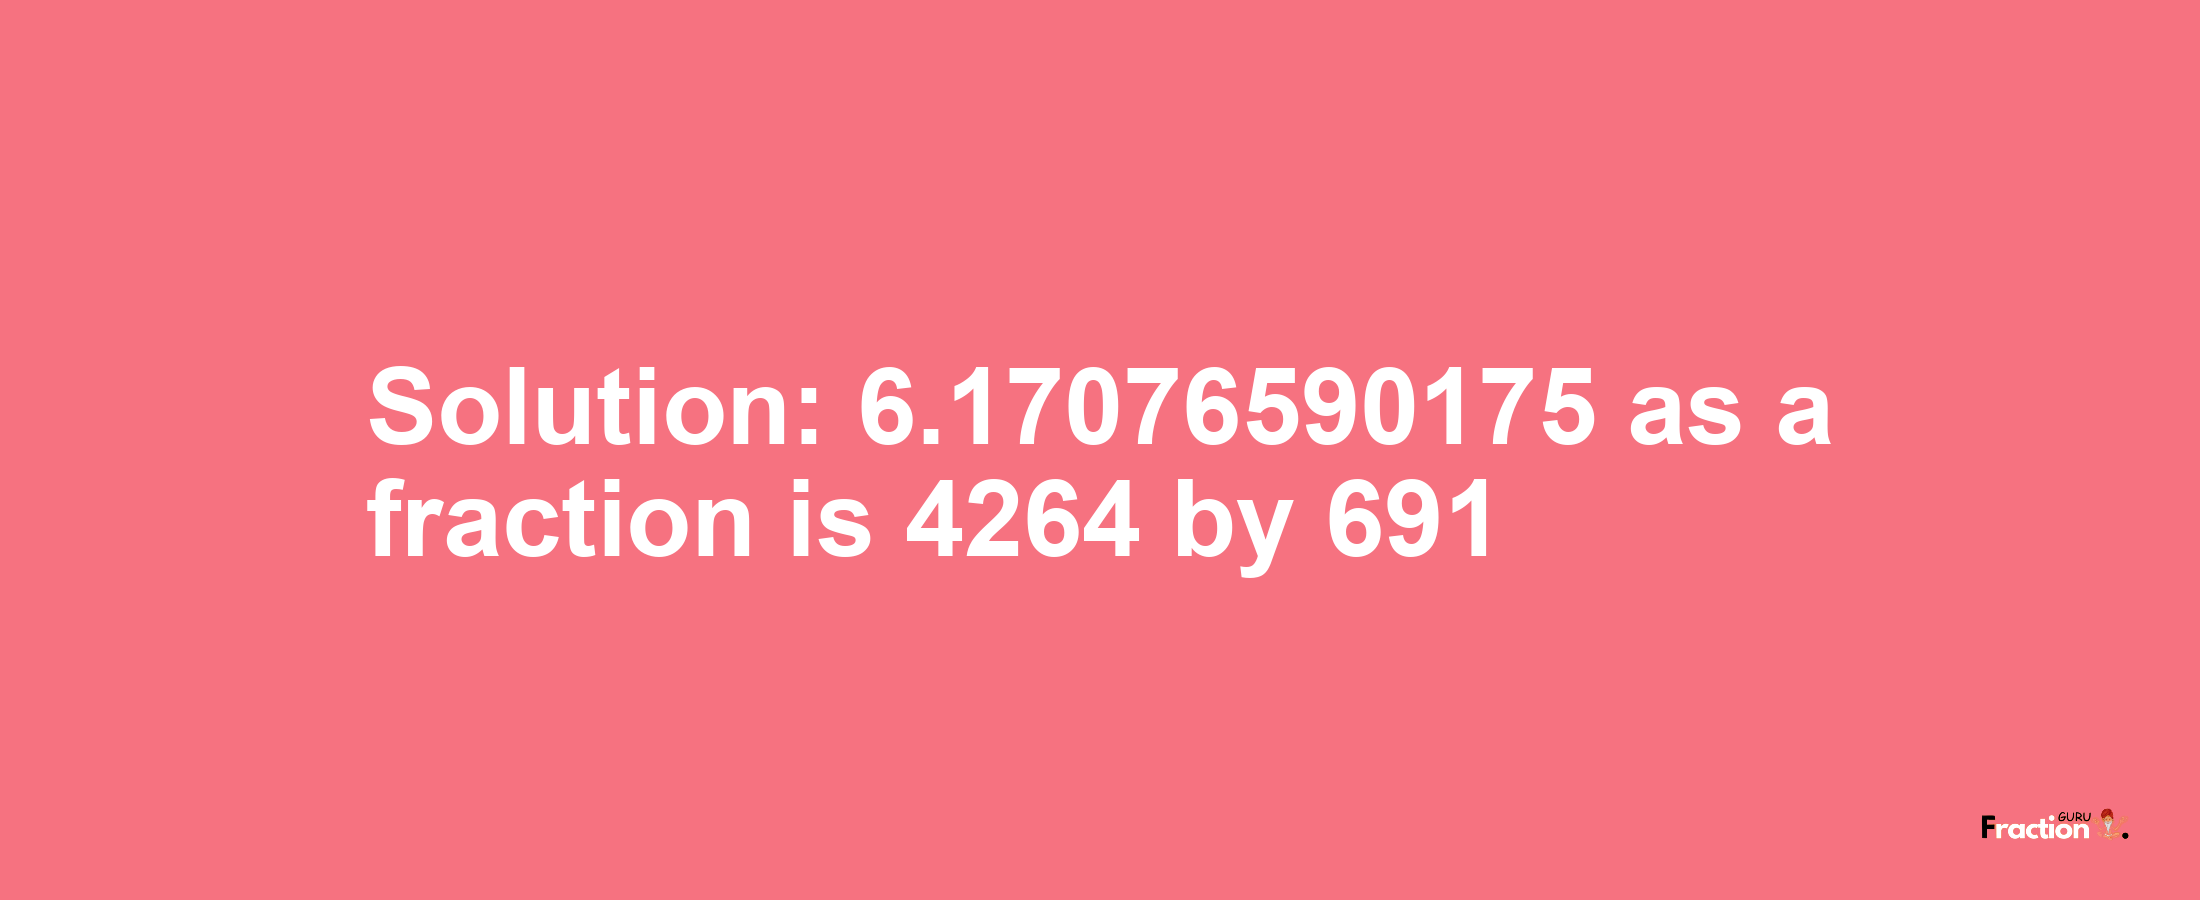 Solution:6.17076590175 as a fraction is 4264/691